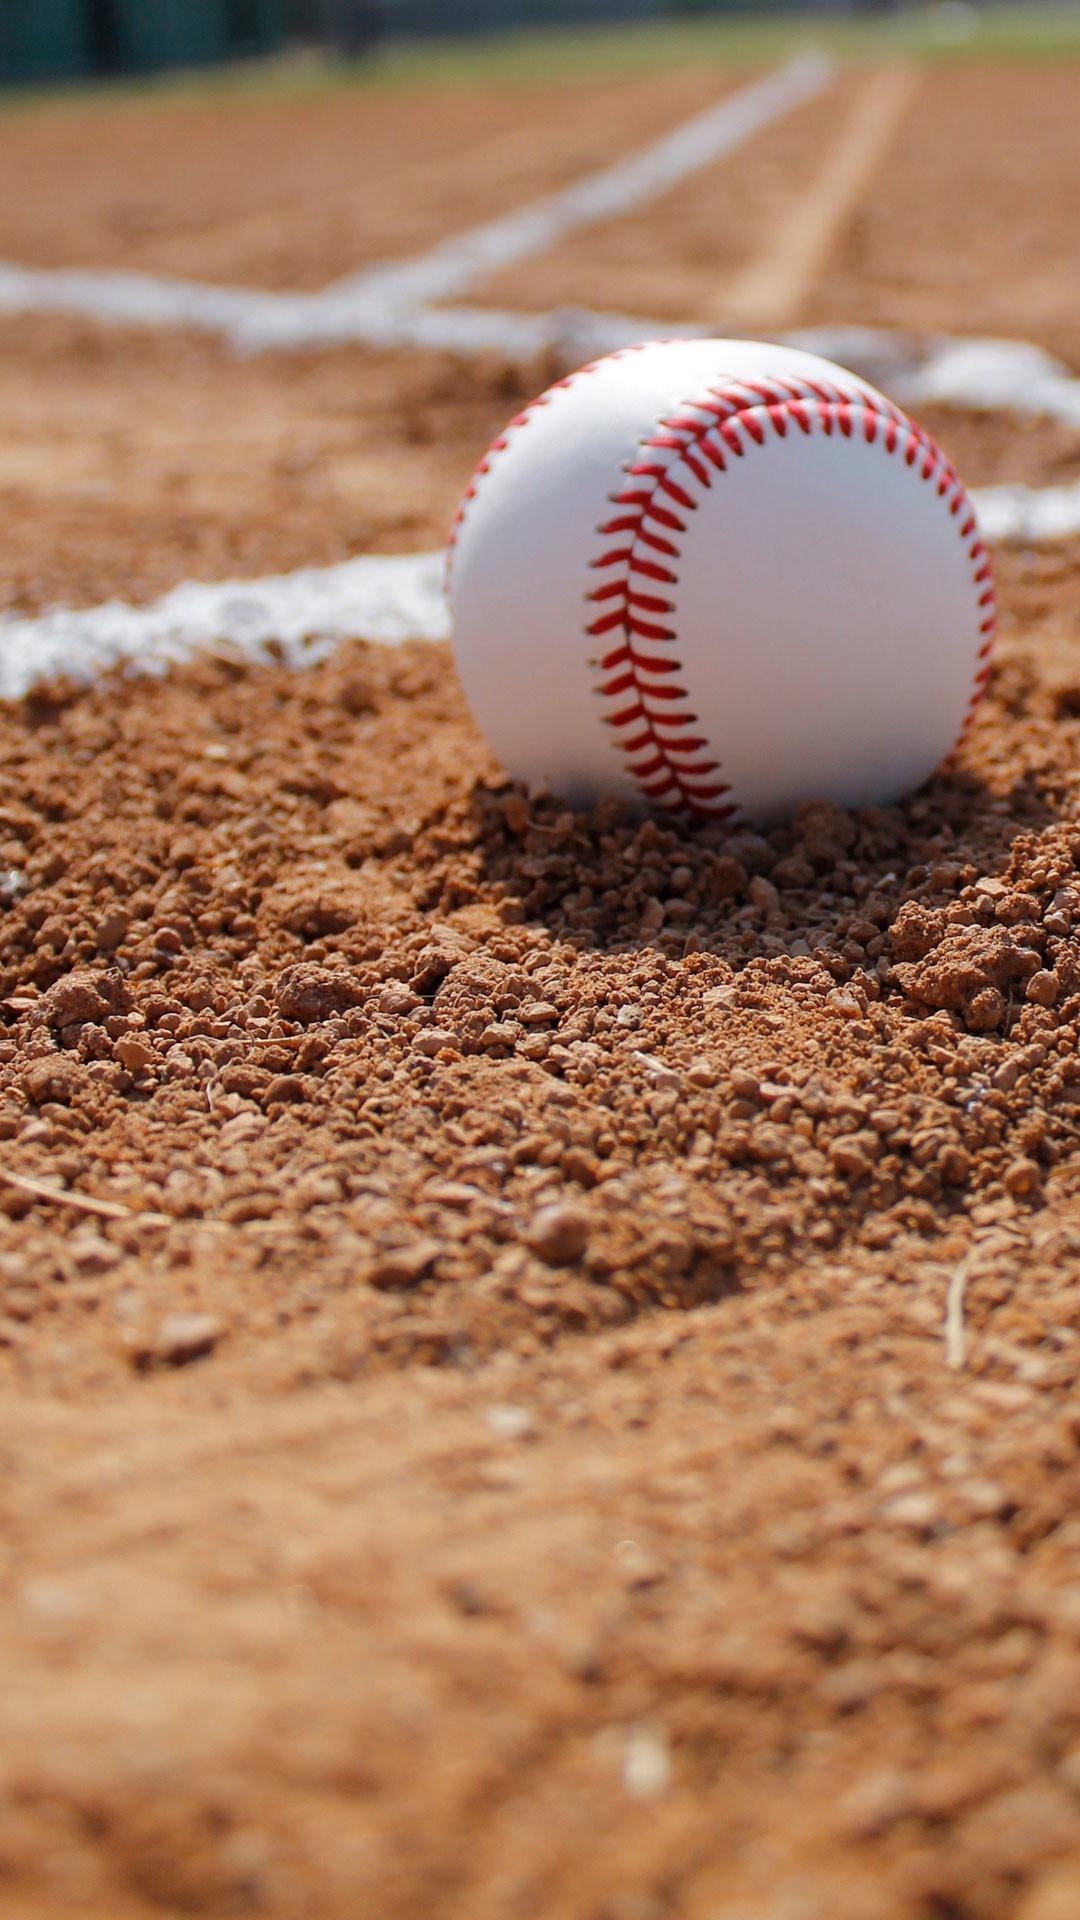 1080x1920 Photo of Baseball for Iphone.